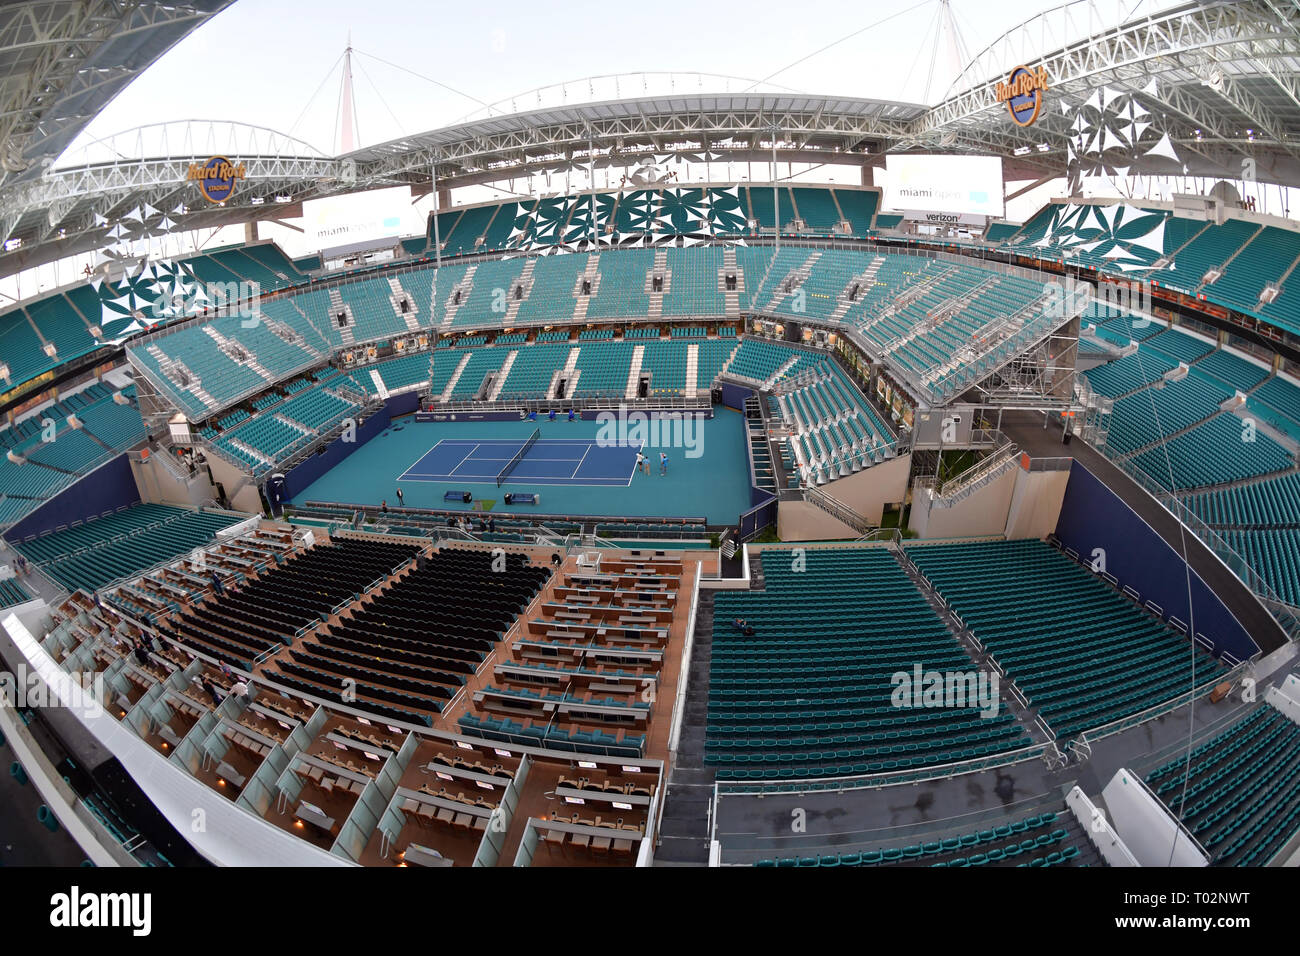 MIAMI GARDENS, FL - MARCH 15: Hard Rock Stadium prepares for the first Miami  Open Tennis Tournament at Hard Rock Stadium on March 15, 2019 in Miami  Gardens, Florida. People: Atmosphere Hoo-Me.com/MediaPunch